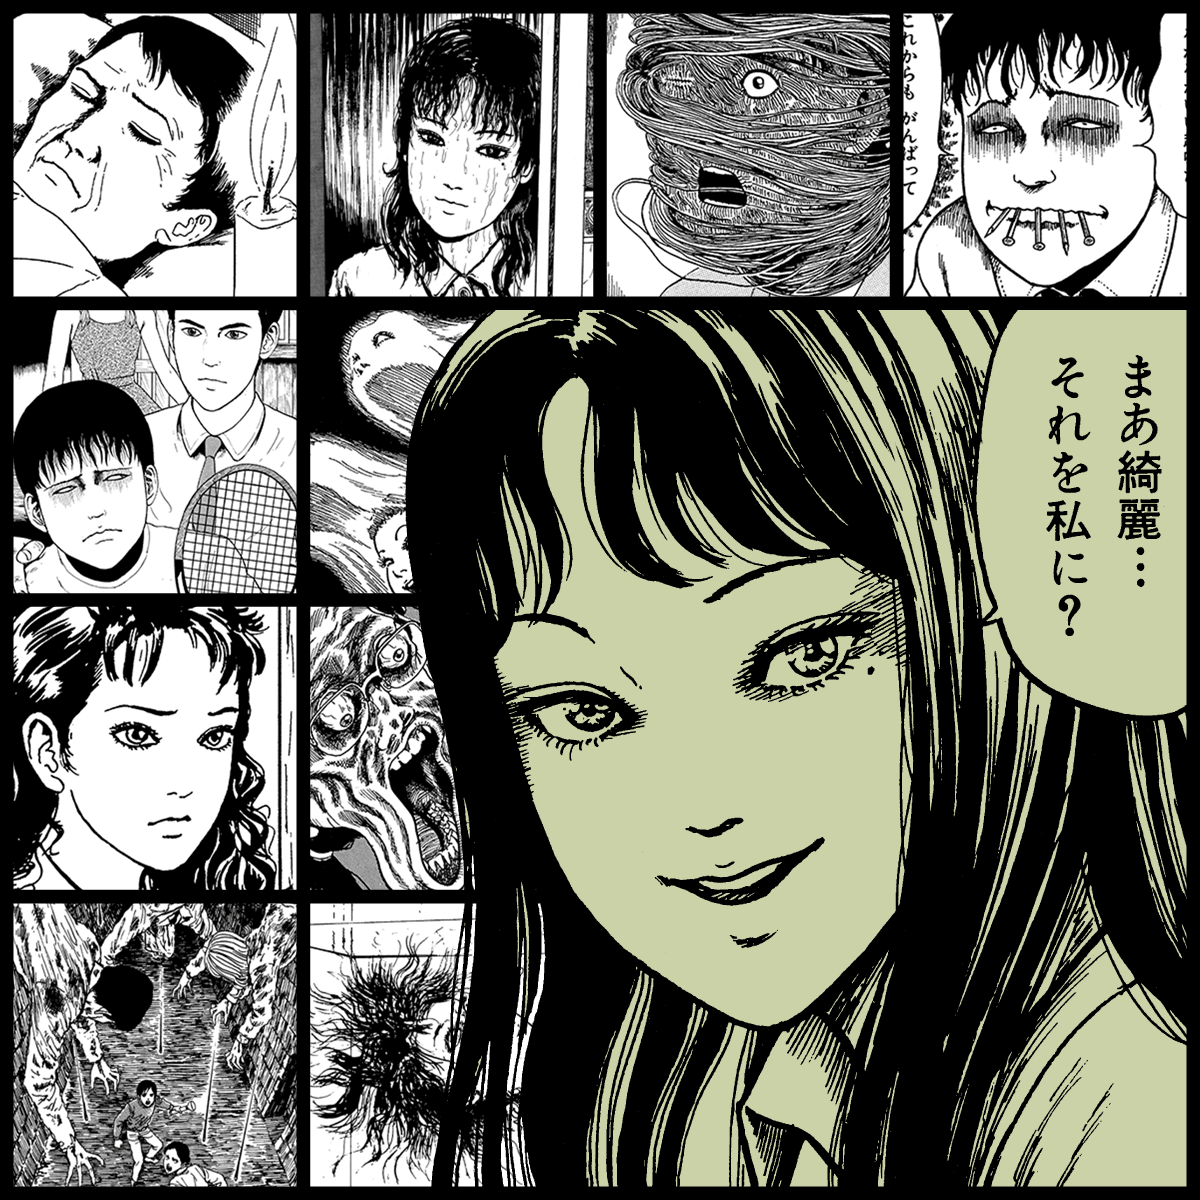 TOMIE by Junji Ito #1319